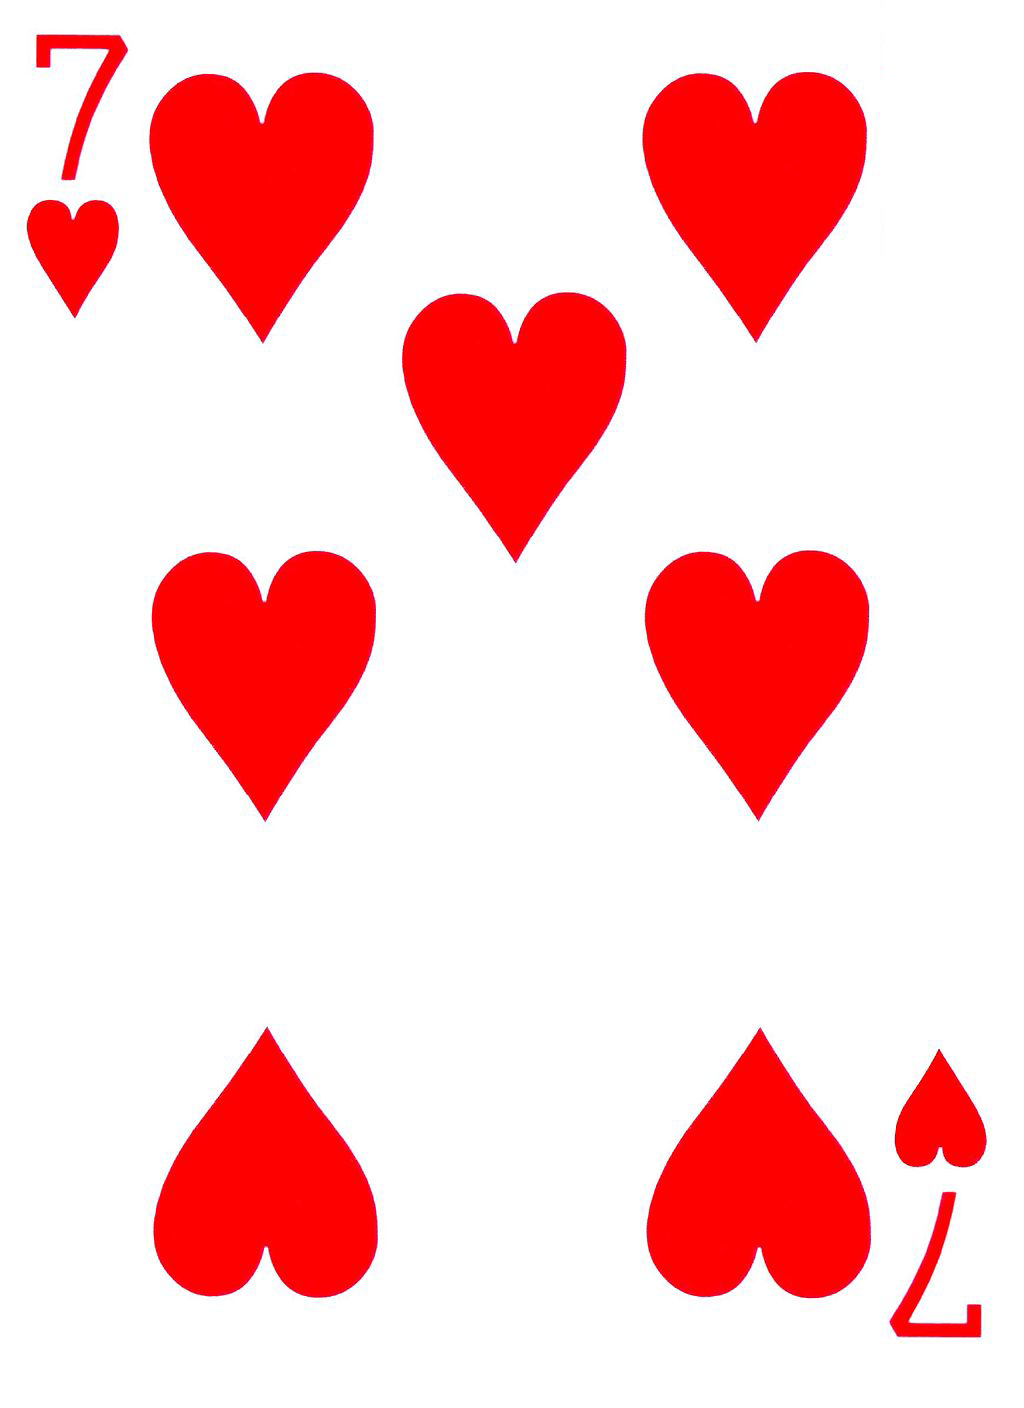 7 Hearts Card Meaning